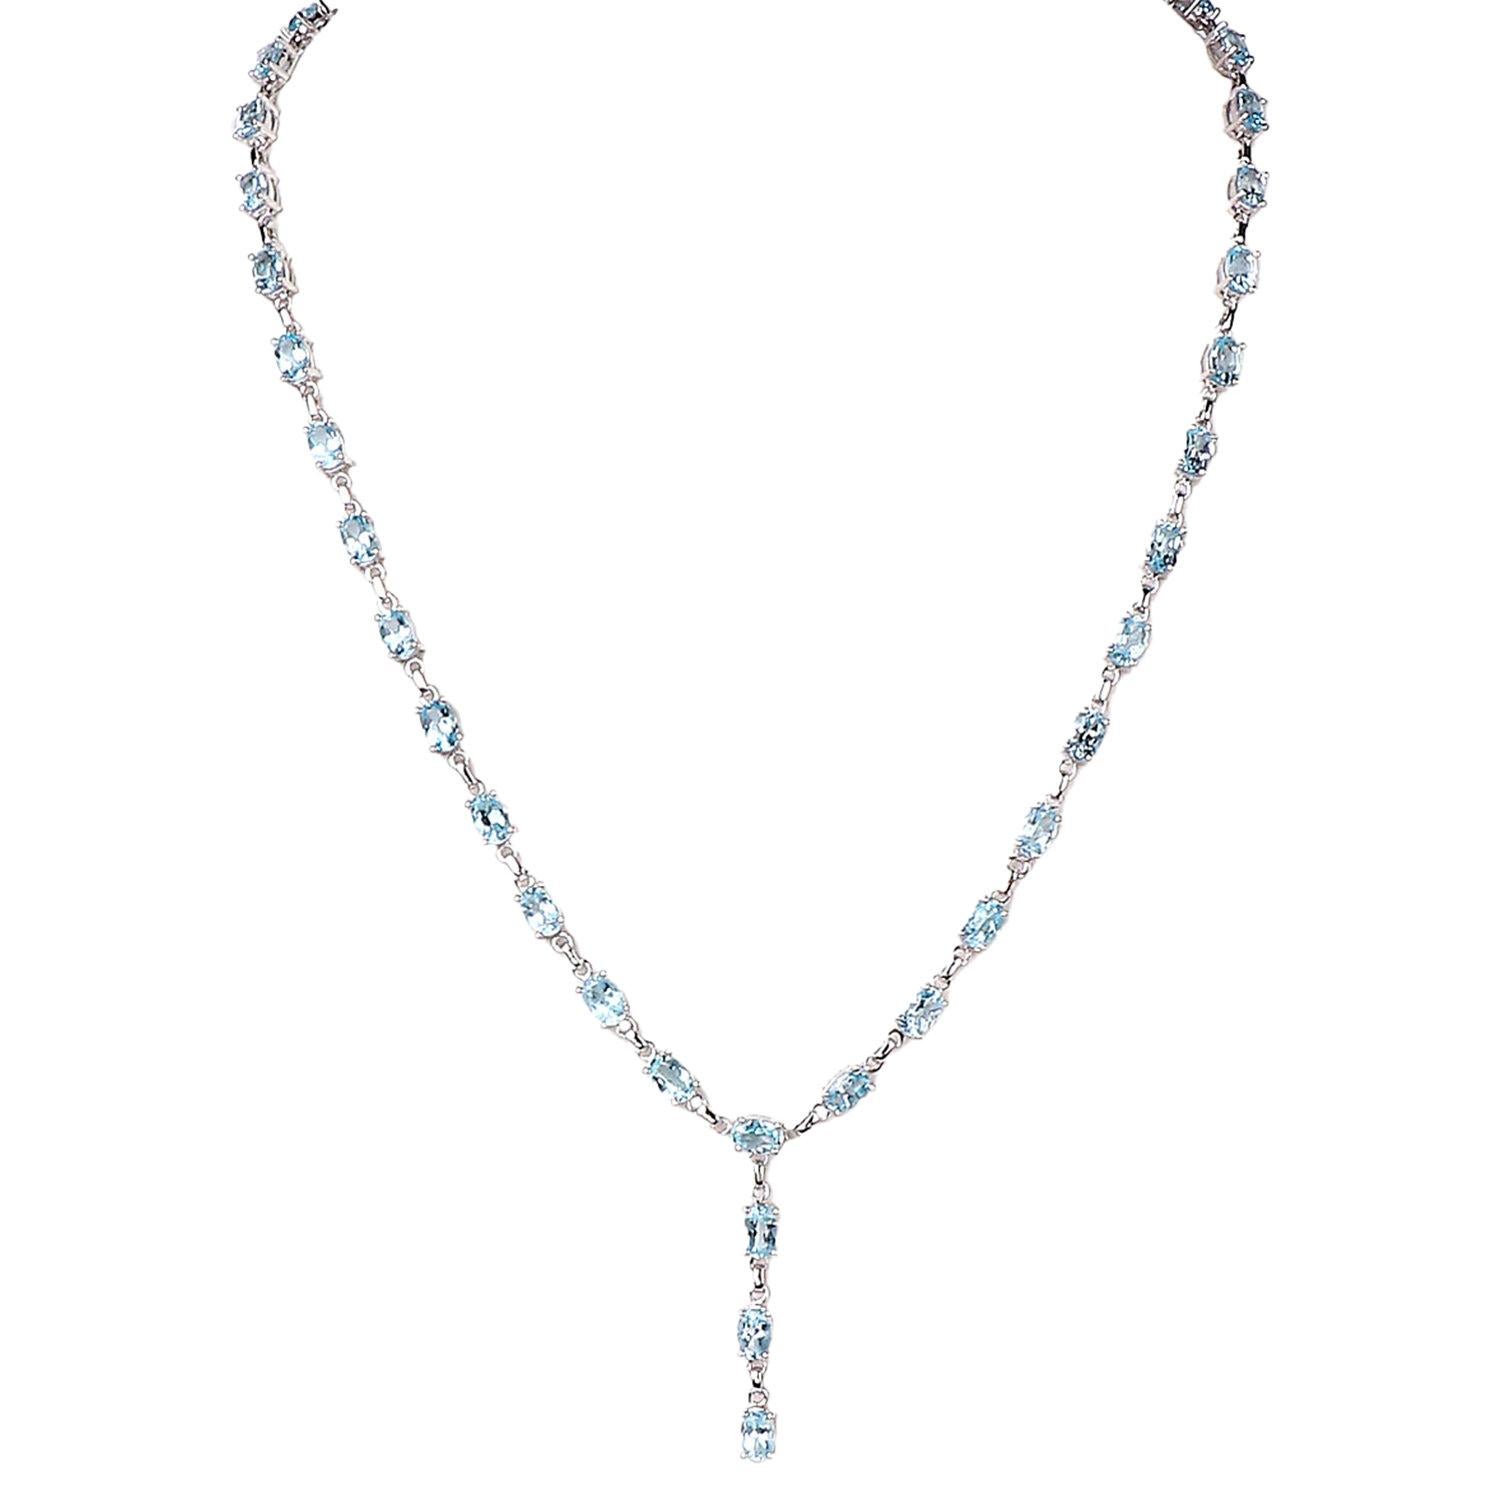 Oval Cut Blue Topaz Drop Necklace 23 Carats Sterling Silver For Sale